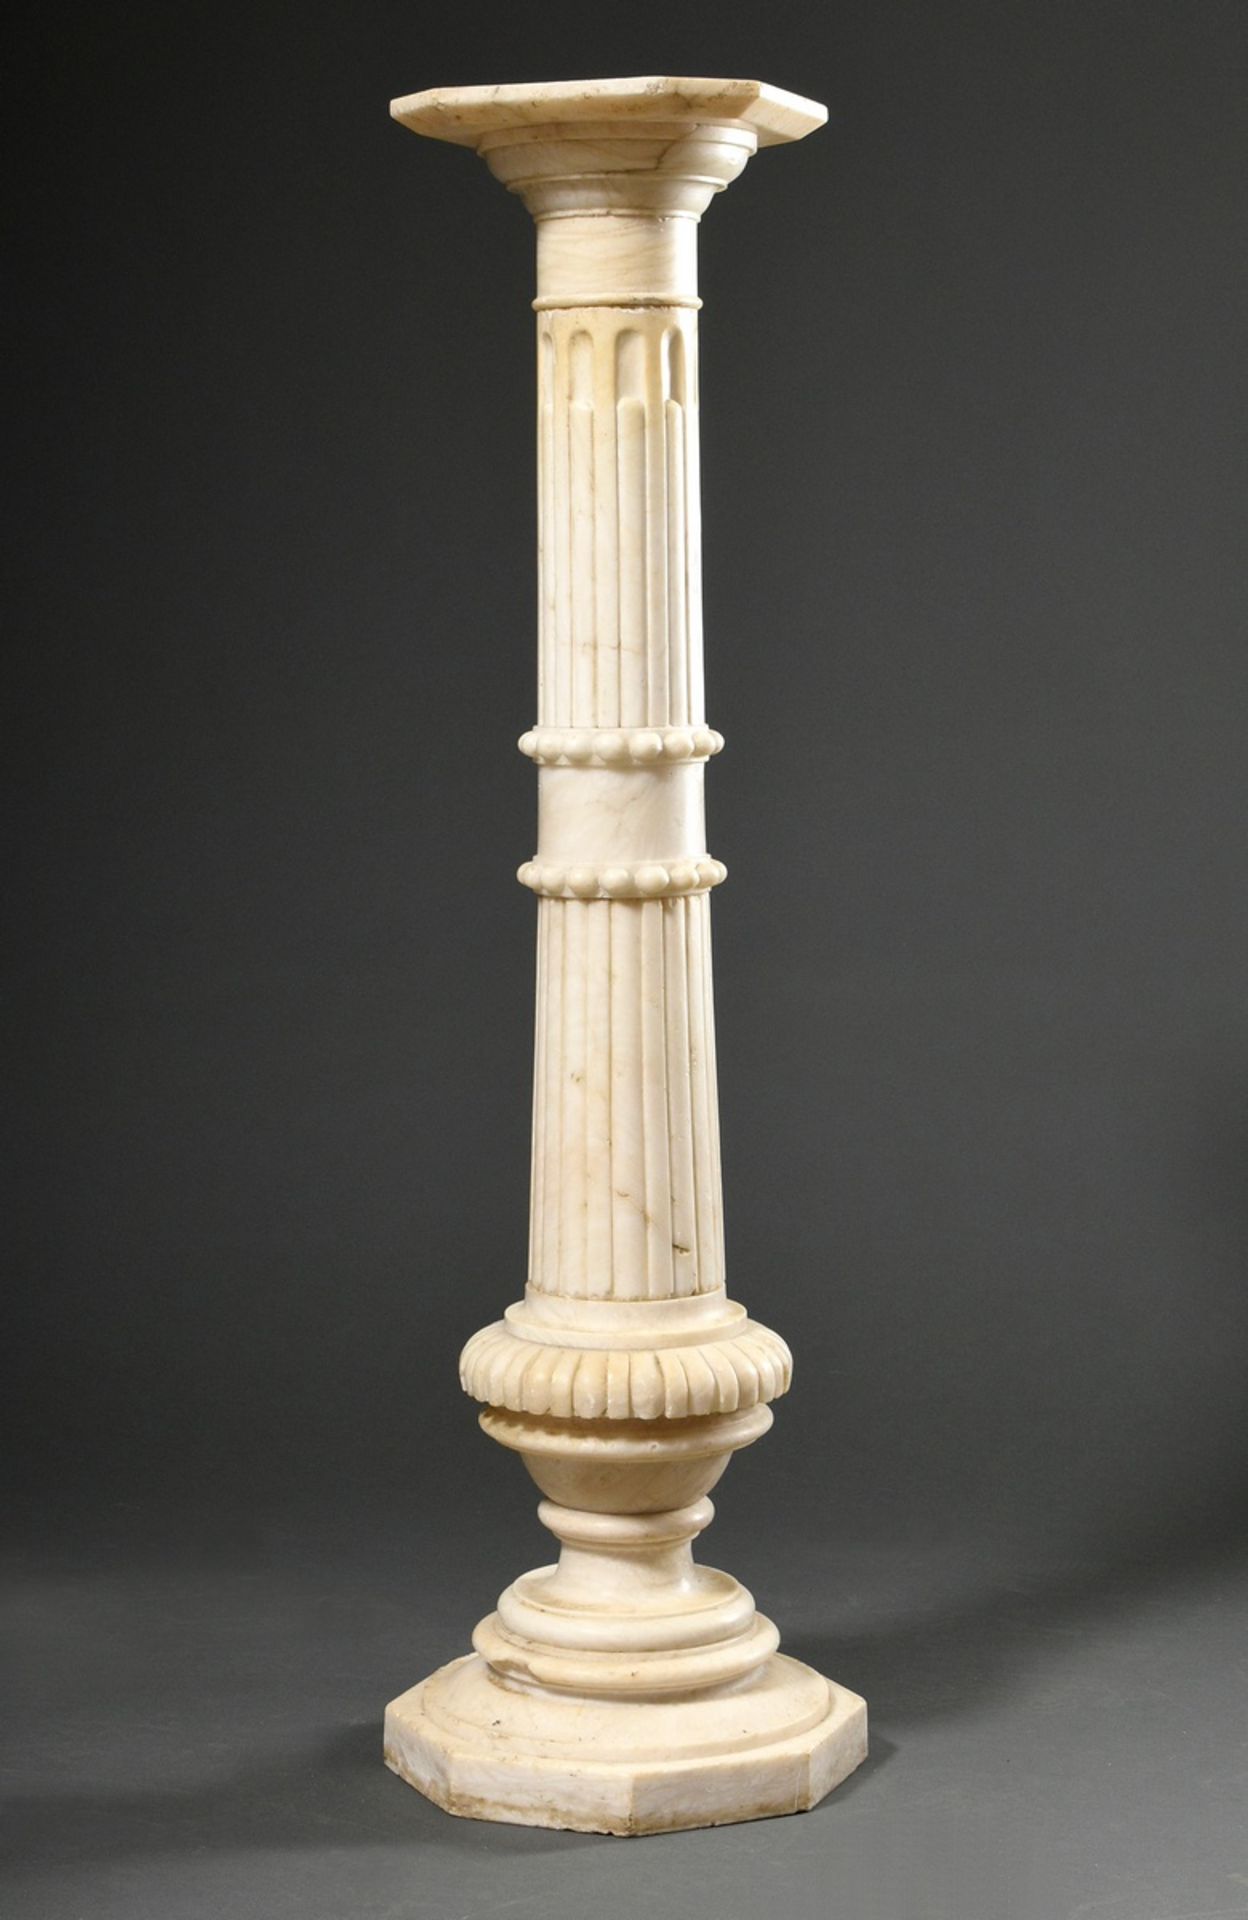 White marble column with fluted shaft and surrounding pearl friezes on an octagonal base, c. 1890, 